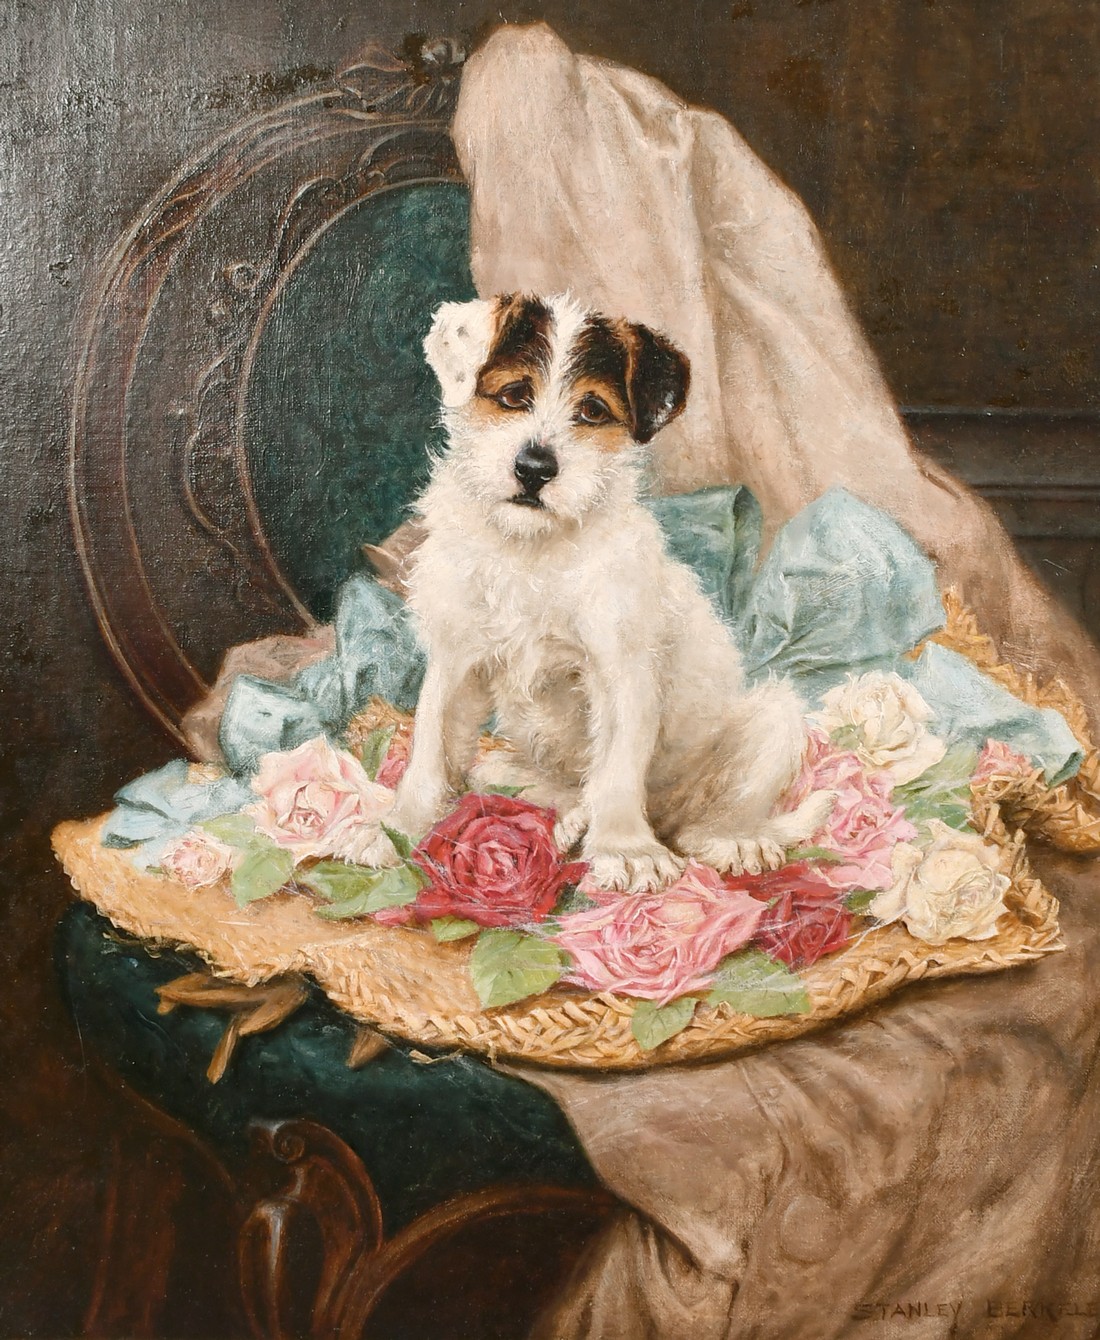 Stanley Barkeley (1855-1909) A portrait of a dog sat amongst roses, oil on canvas, signed, 21" x